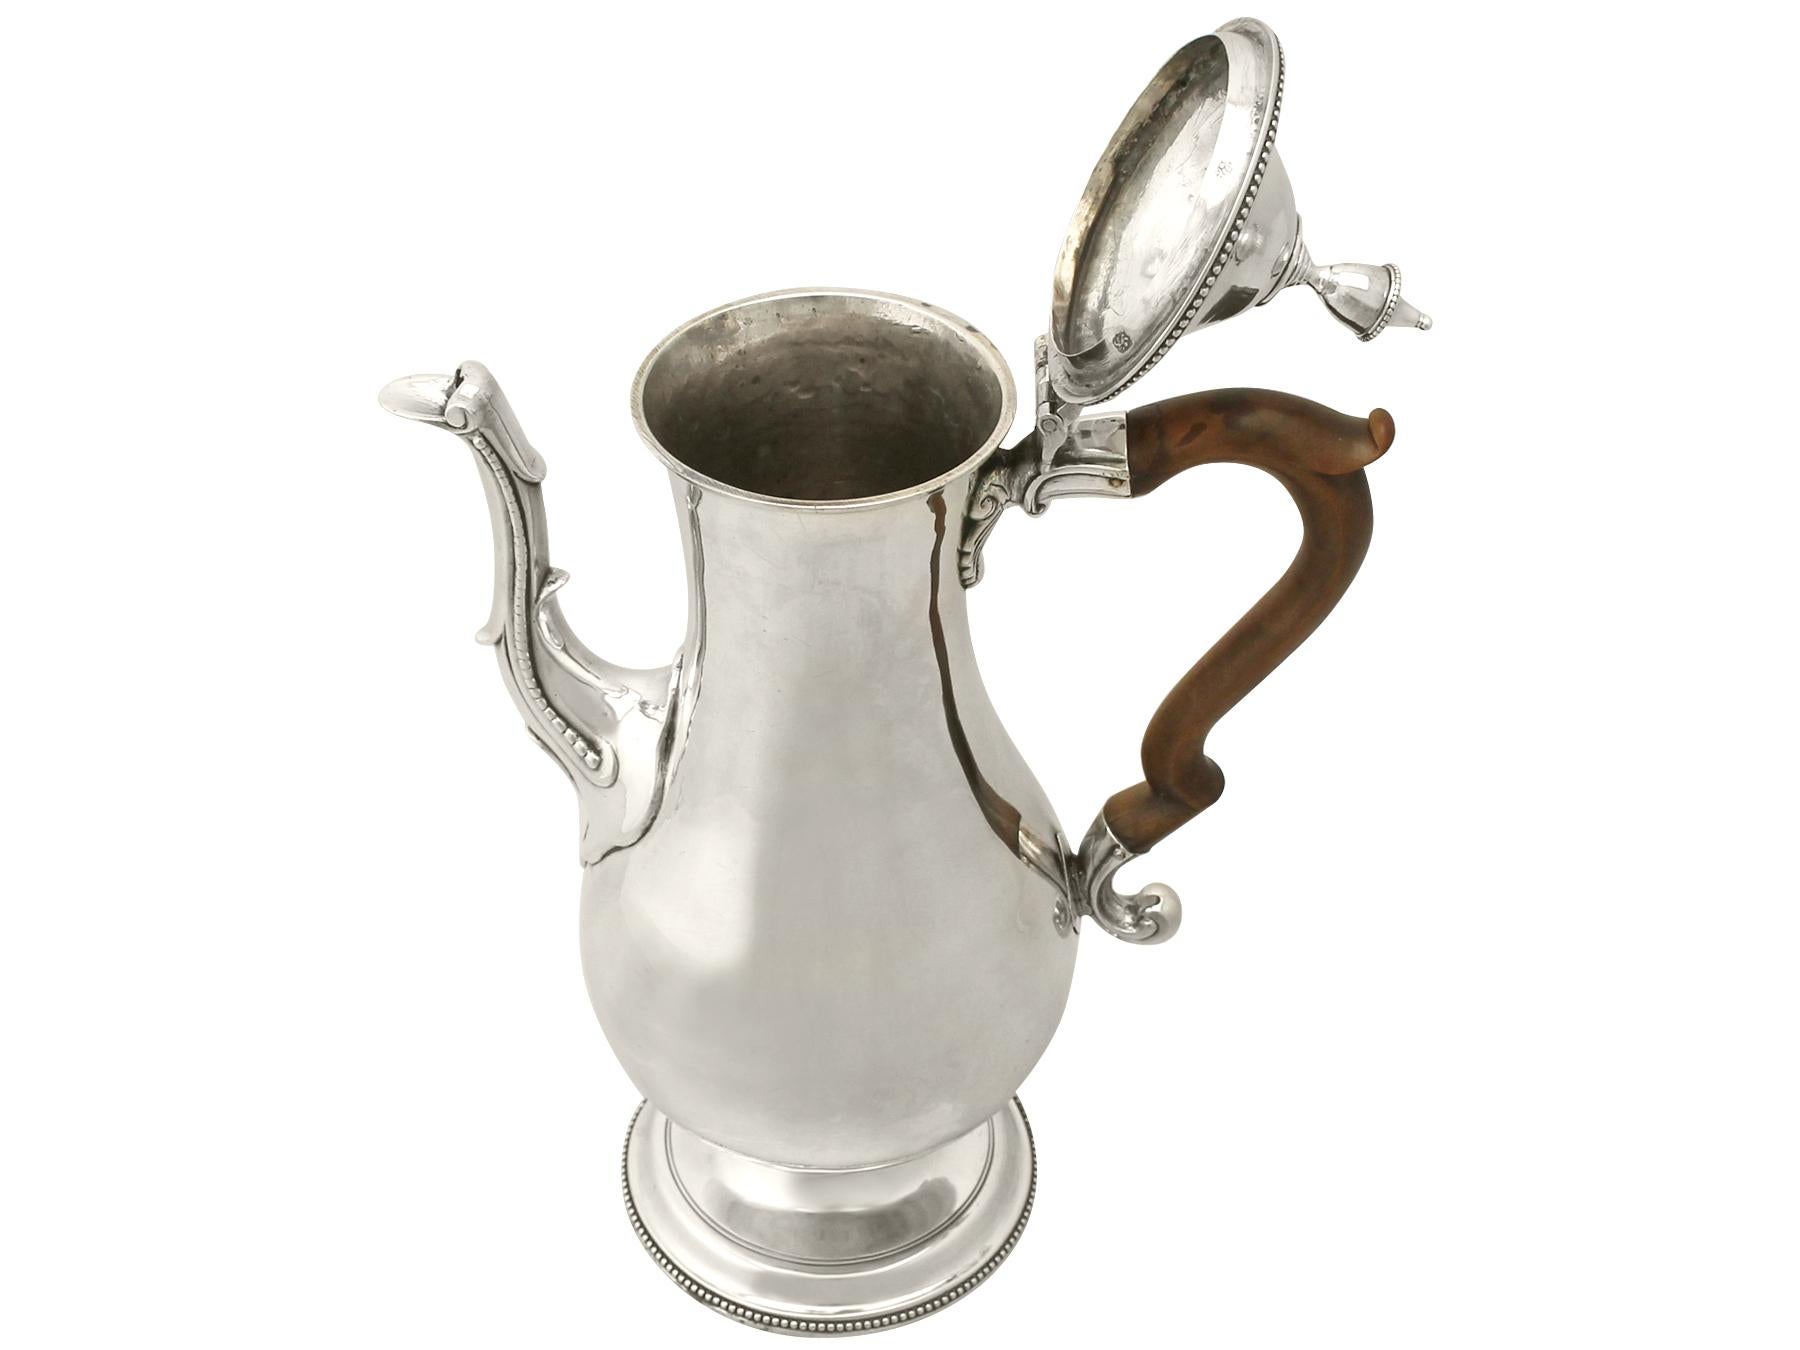 Late 18th Century Antique George III Sterling Silver Coffee Pot by Hester Bateman